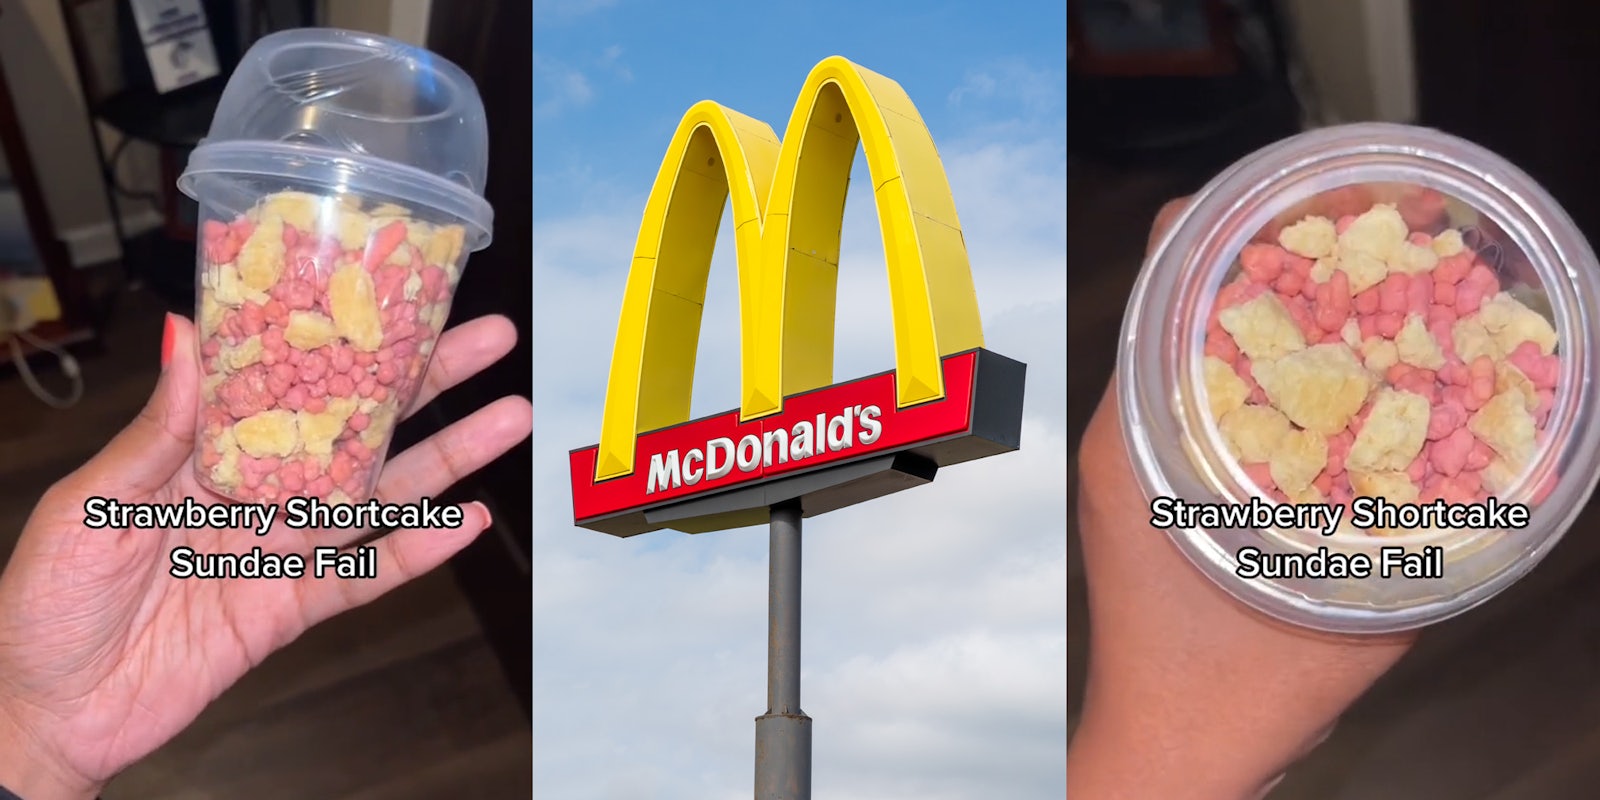 McDonald's customer holding strawberry shortcake McFlurry ingredients in McFlurry cup with caption 'Strawberry Shortcake Sundae Fail' (l) McDonald's sign in front of blue sky (c) McDonald's customer holding strawberry shortcake McFlurry ingredients in McFlurry cup with caption 'Strawberry Shortcake Sundae Fail' (r)